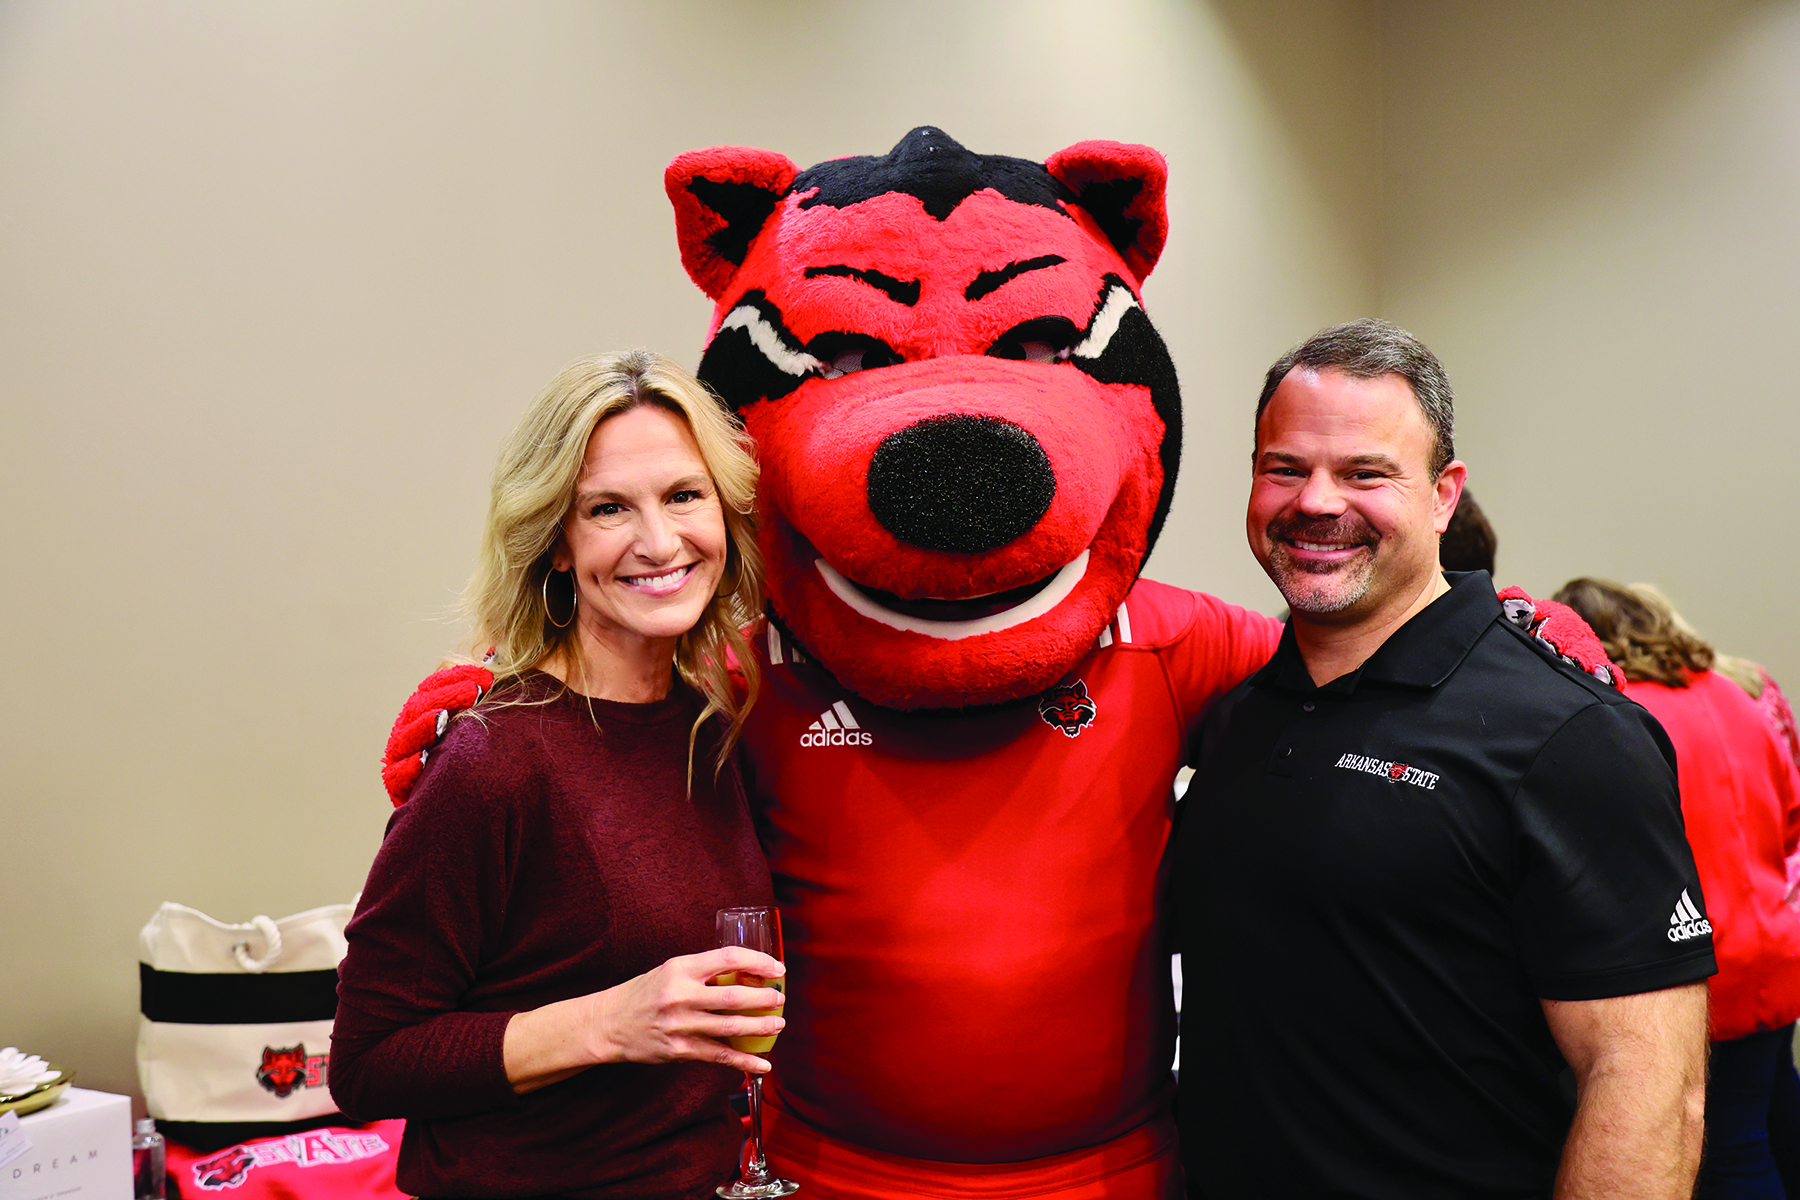 A-State Bubbles & Bingo Benefits Rugby Club